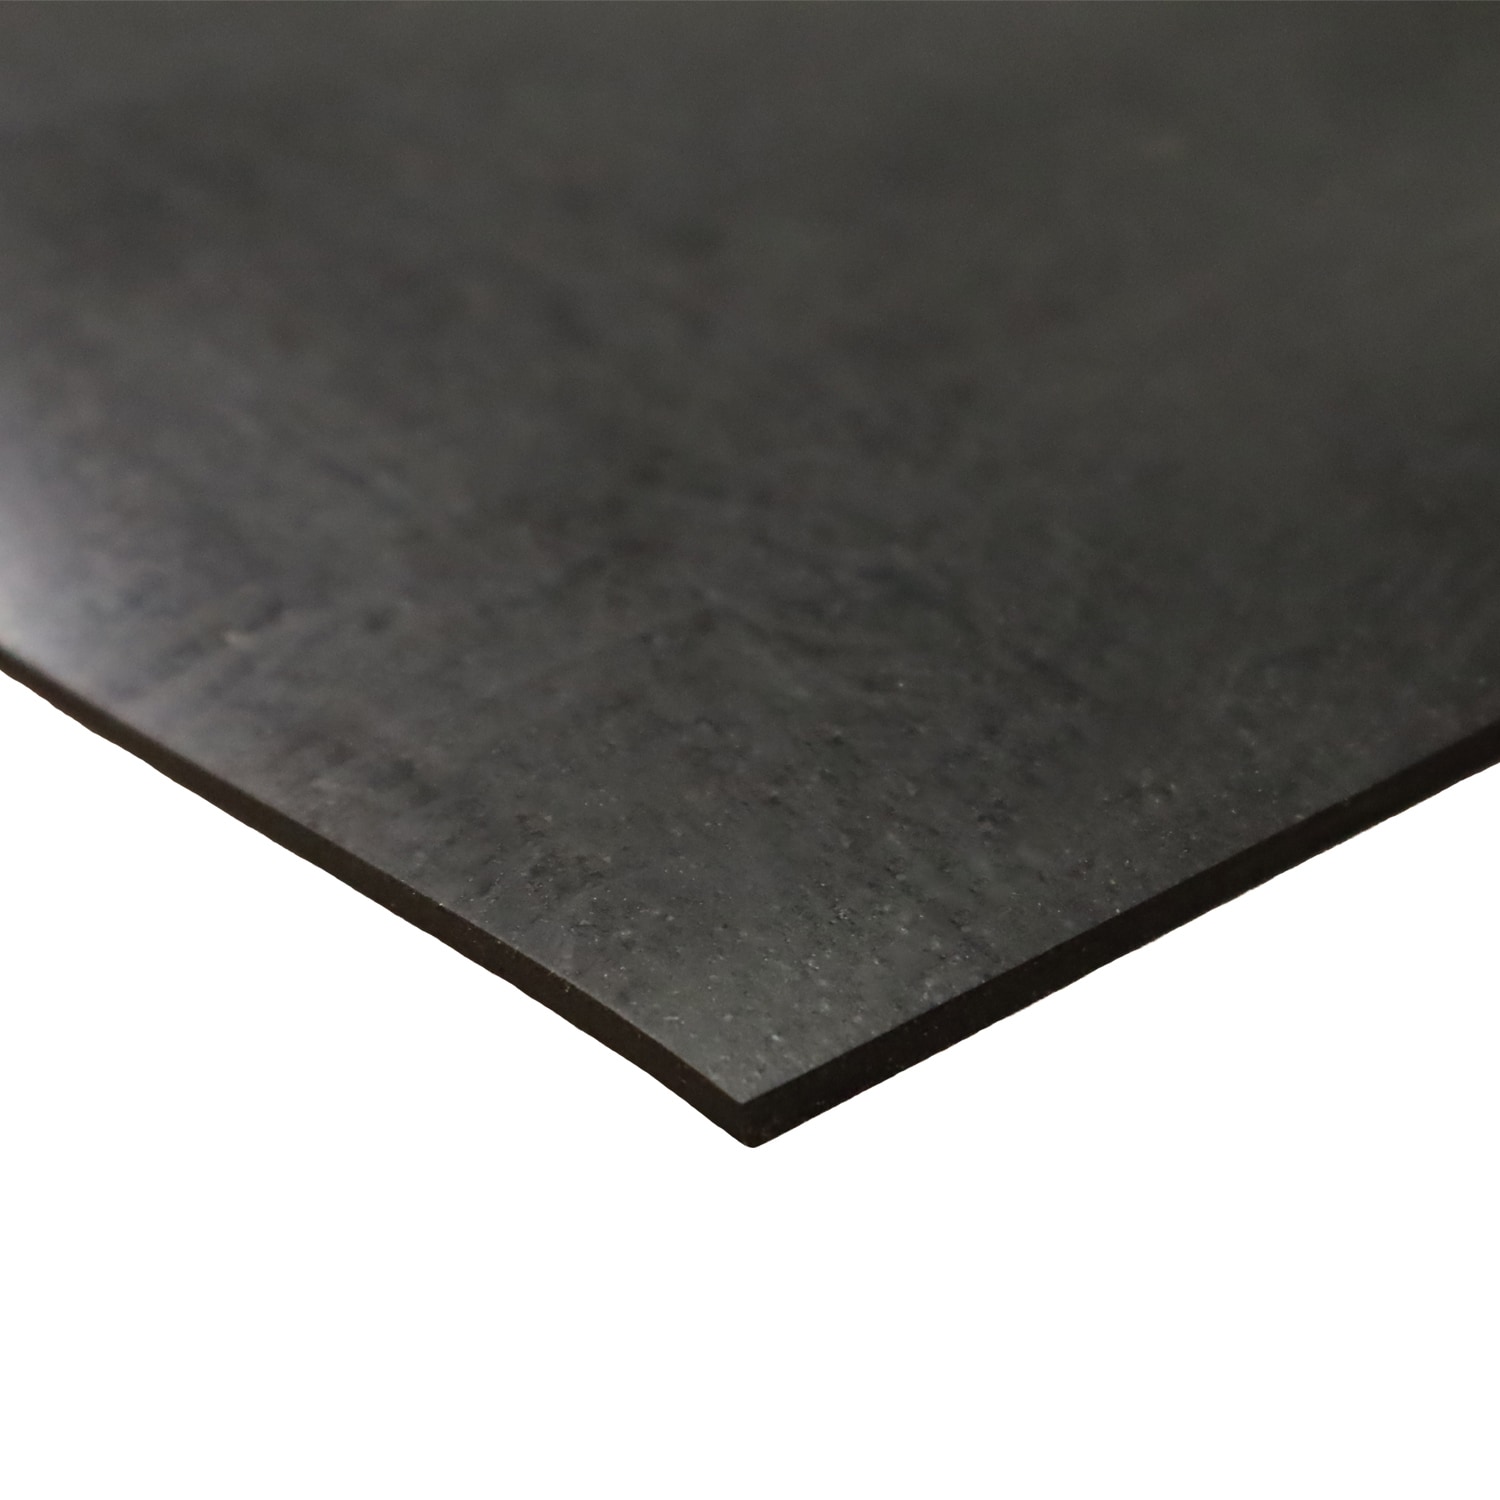 Rubber-Cal Closed Cell Rubber Blend - 39 x 78 - 8 Thickness Variations -  Black - On Sale - Bed Bath & Beyond - 24224477